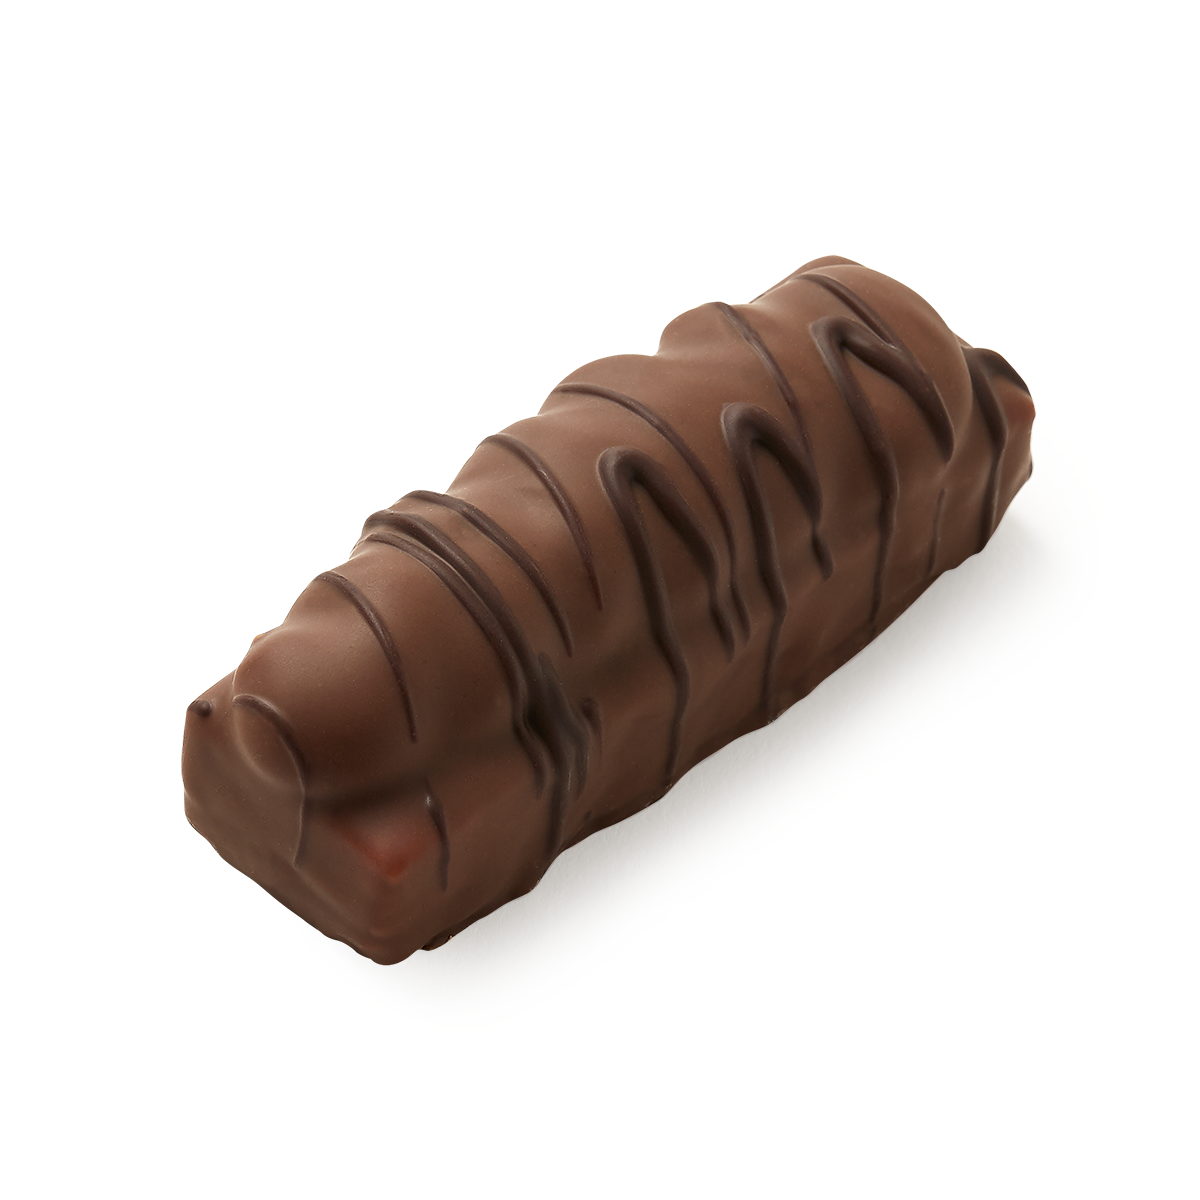 Biscuit covered in milk chocolate with a dark chocolate drizzle